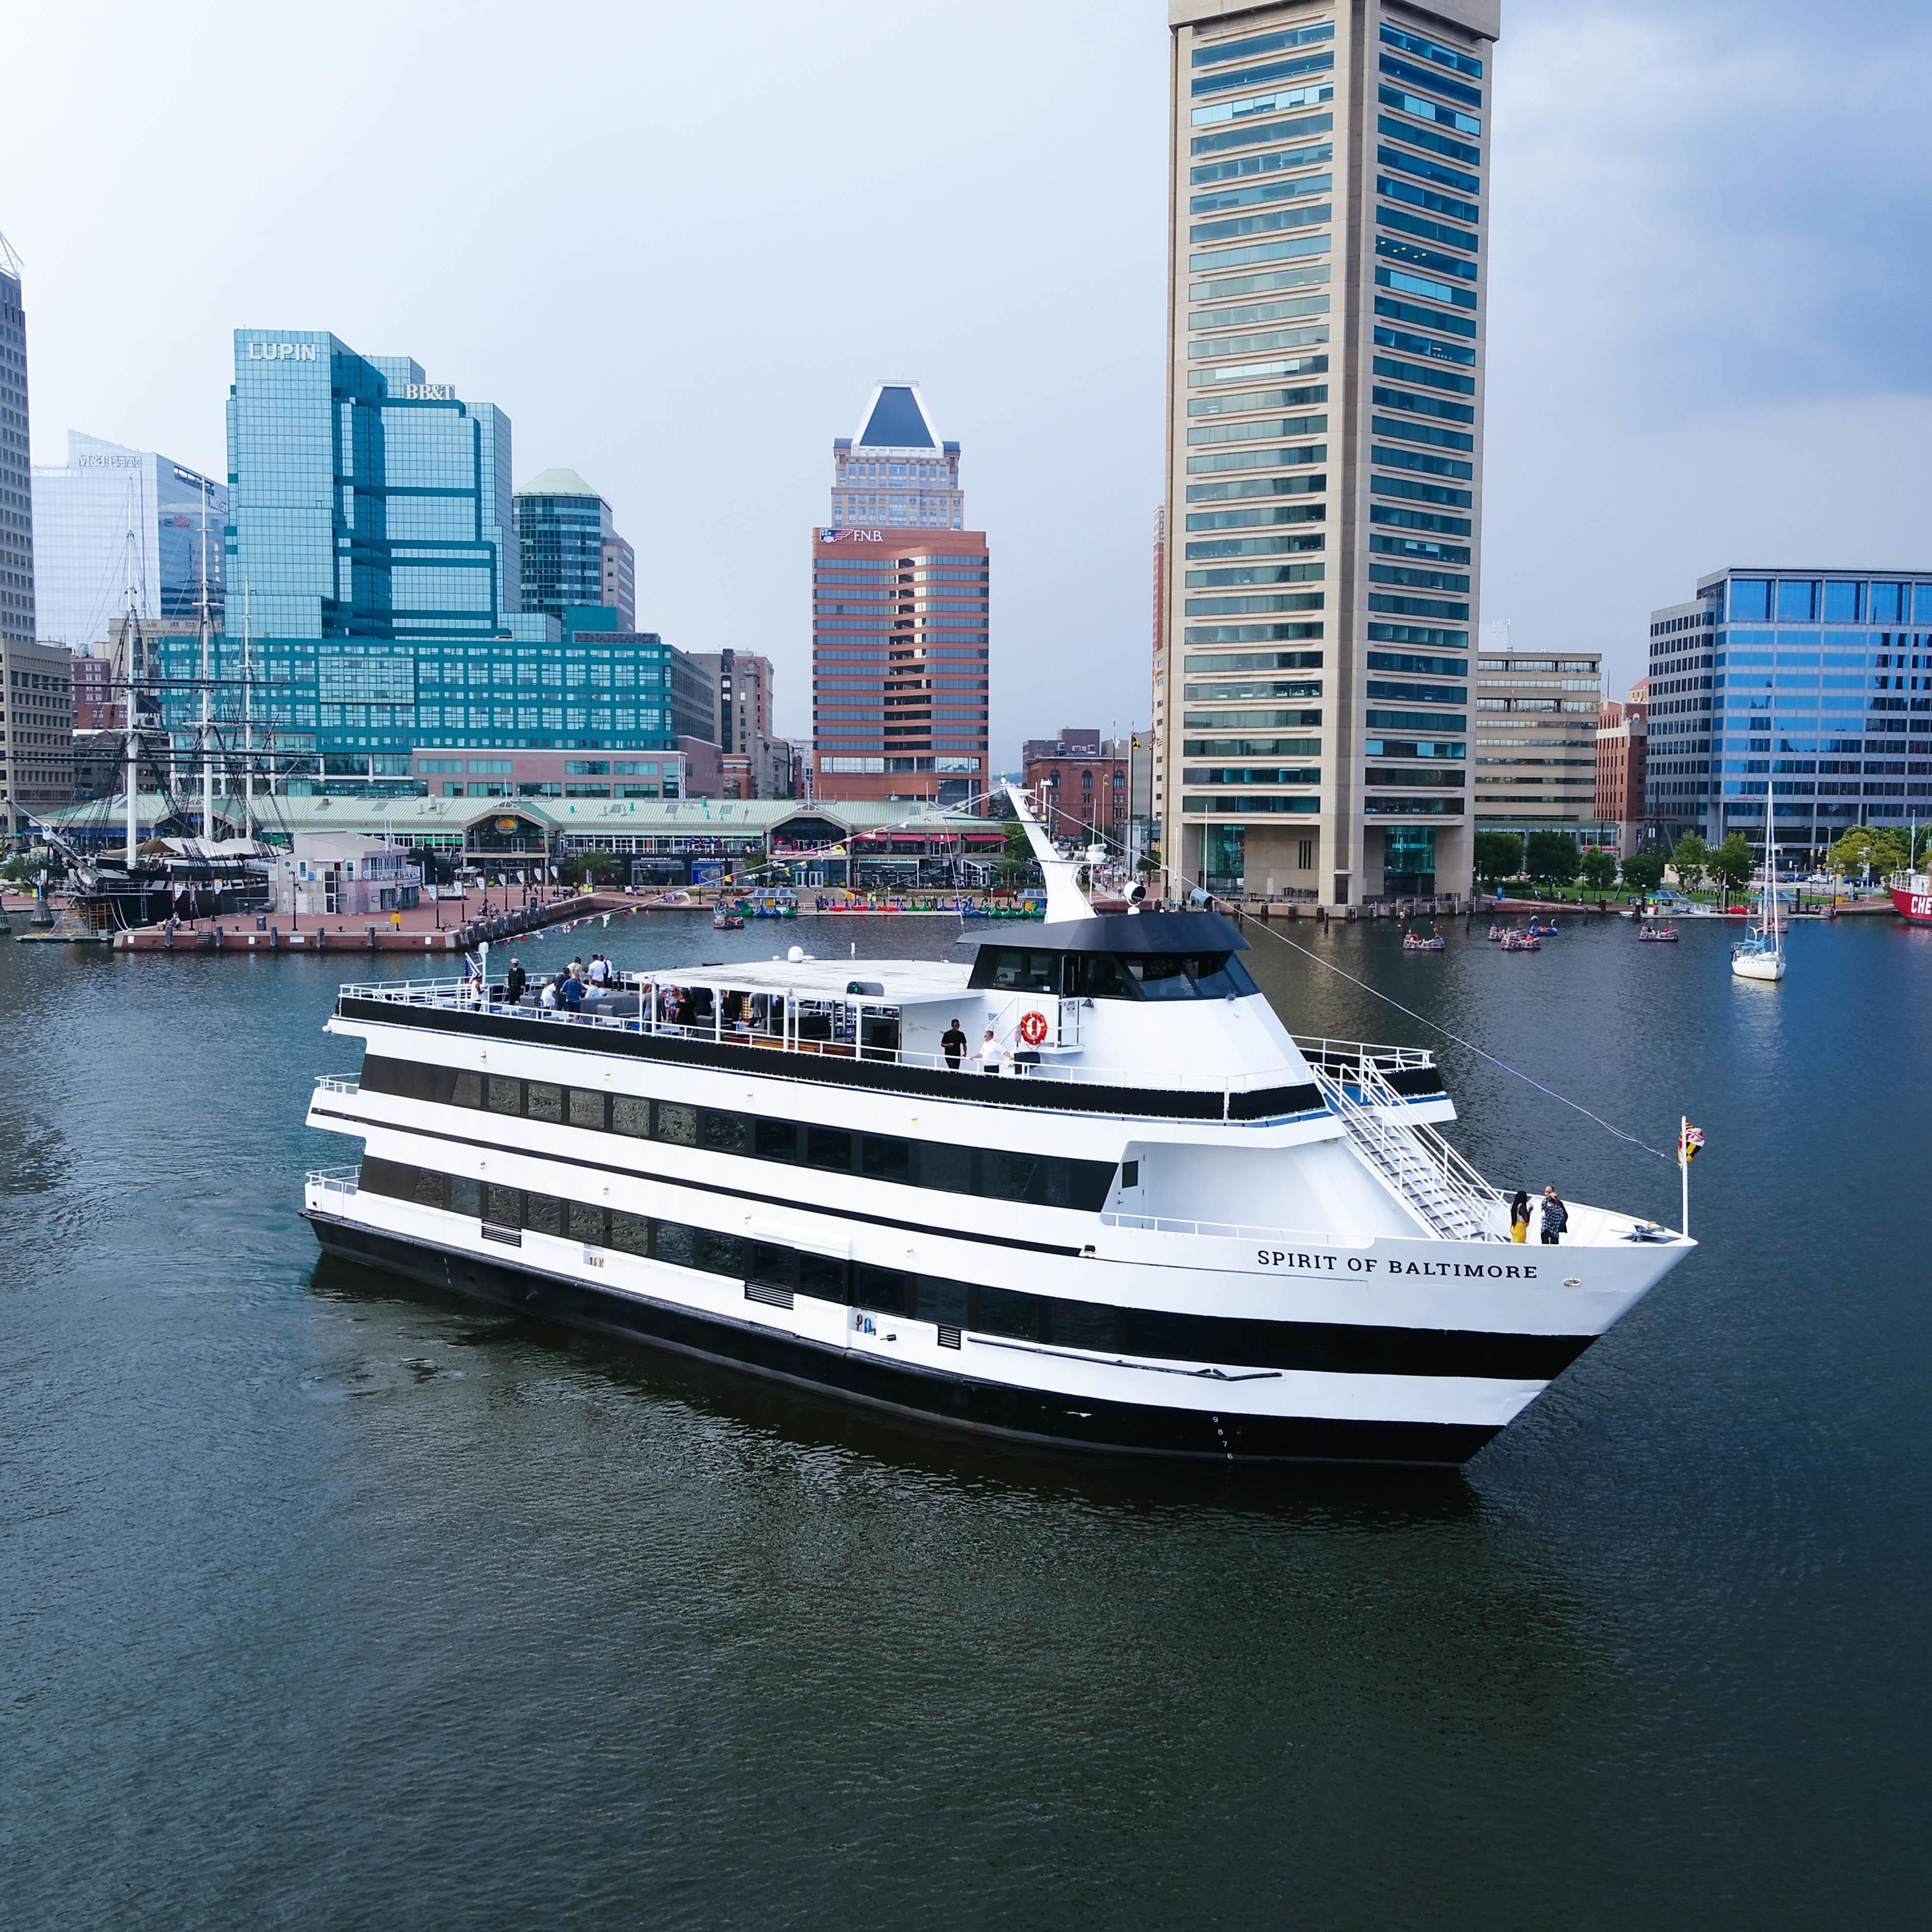 Set Sail in Baltimore with Hornblower Cruises & Events This